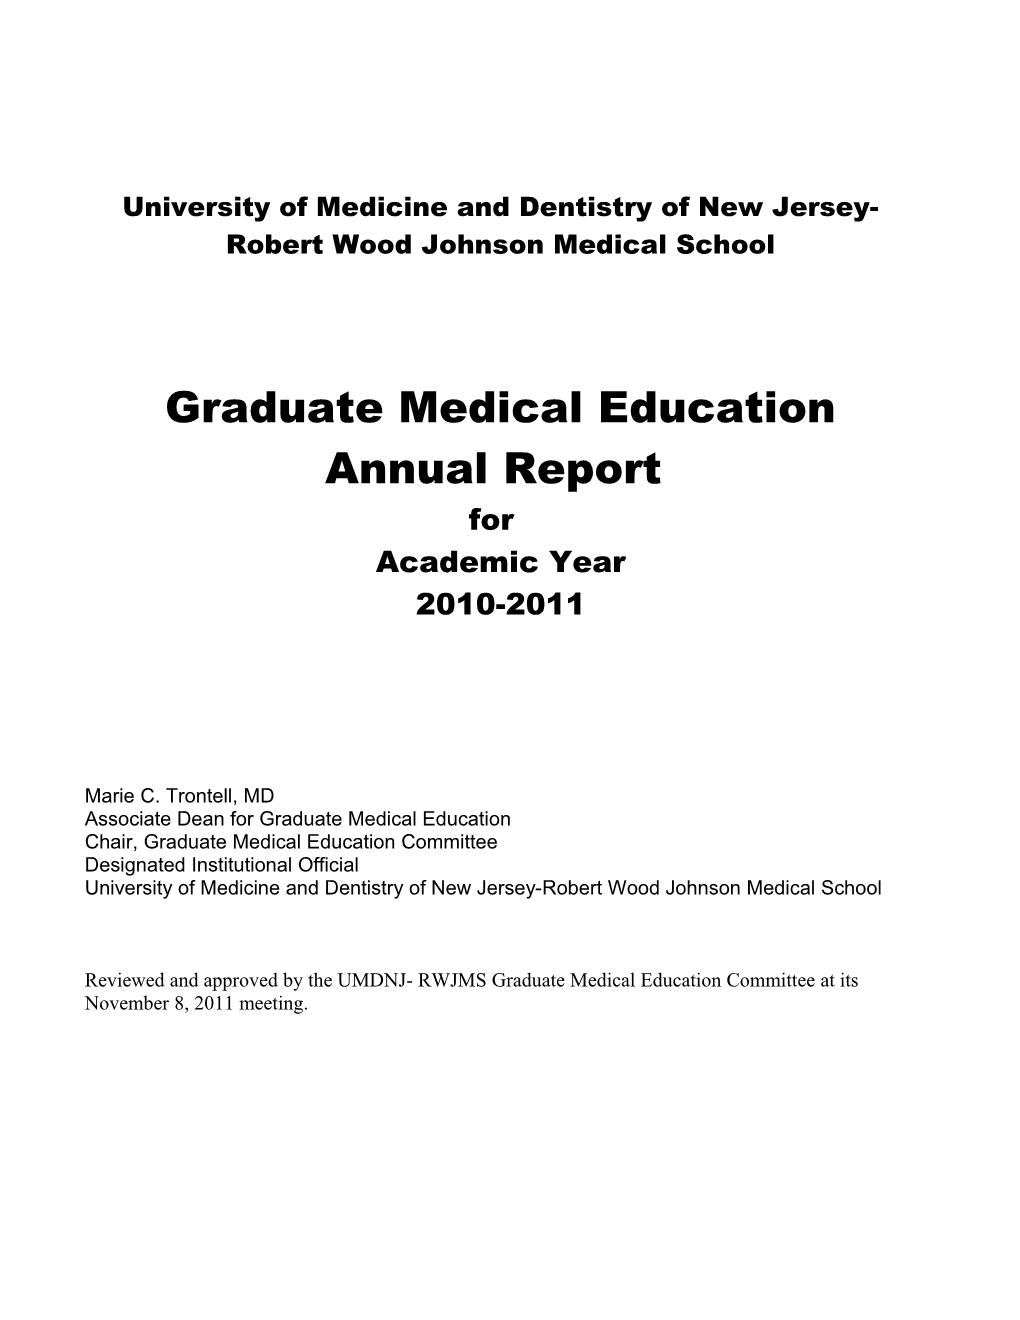 University of Medicine and Dentistry of New Jersey